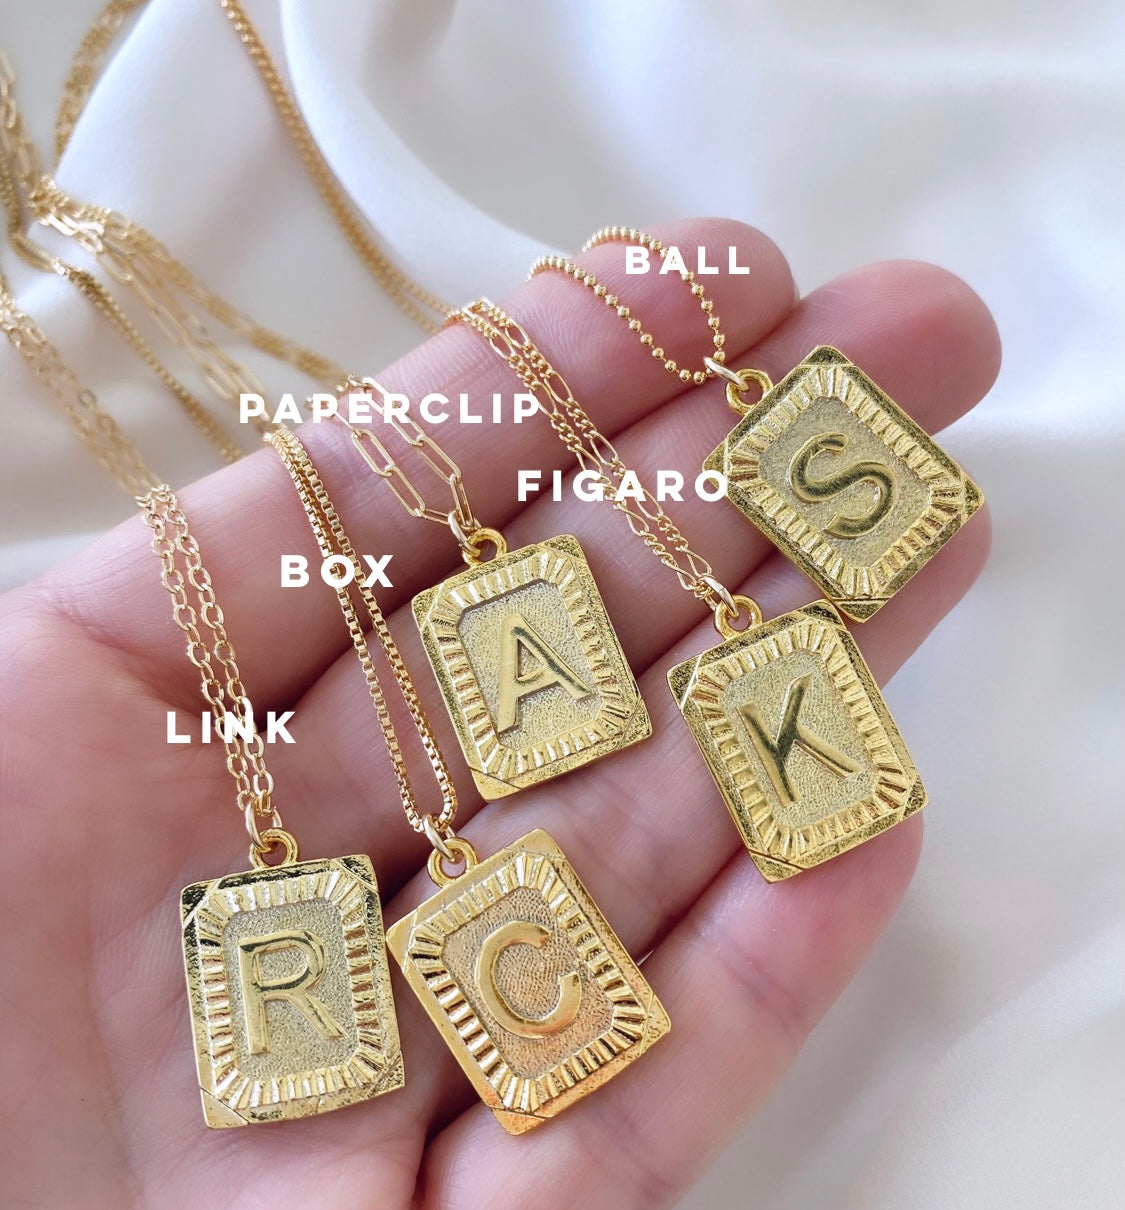 links necklace engraved